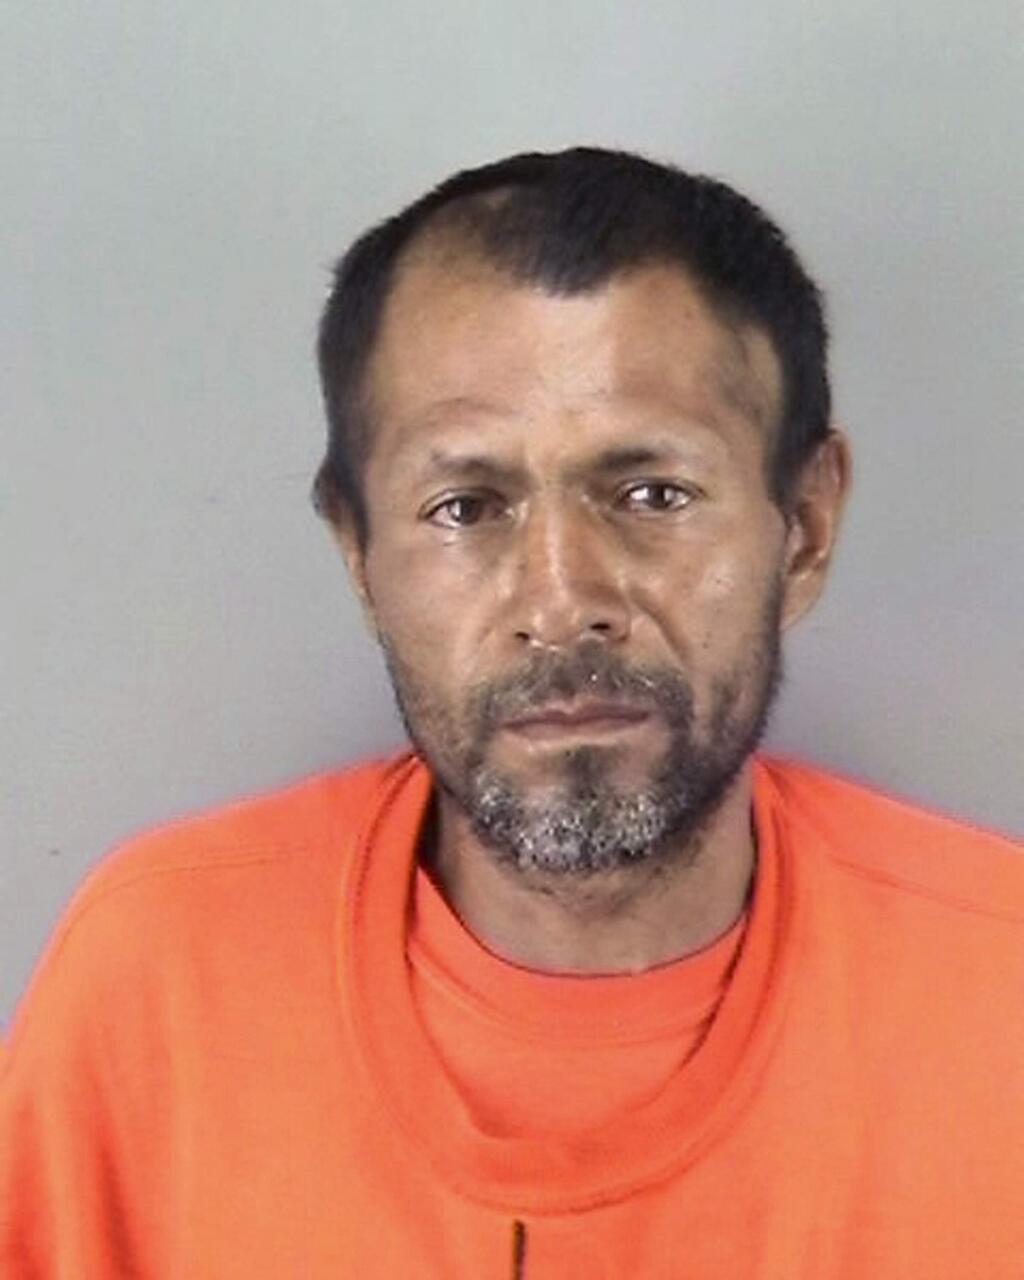 FILE - This undated file booking photo provided by the San Francisco Police Department shows Jose Ines Garcia Zarate. (San Francisco Police Department via AP, File)